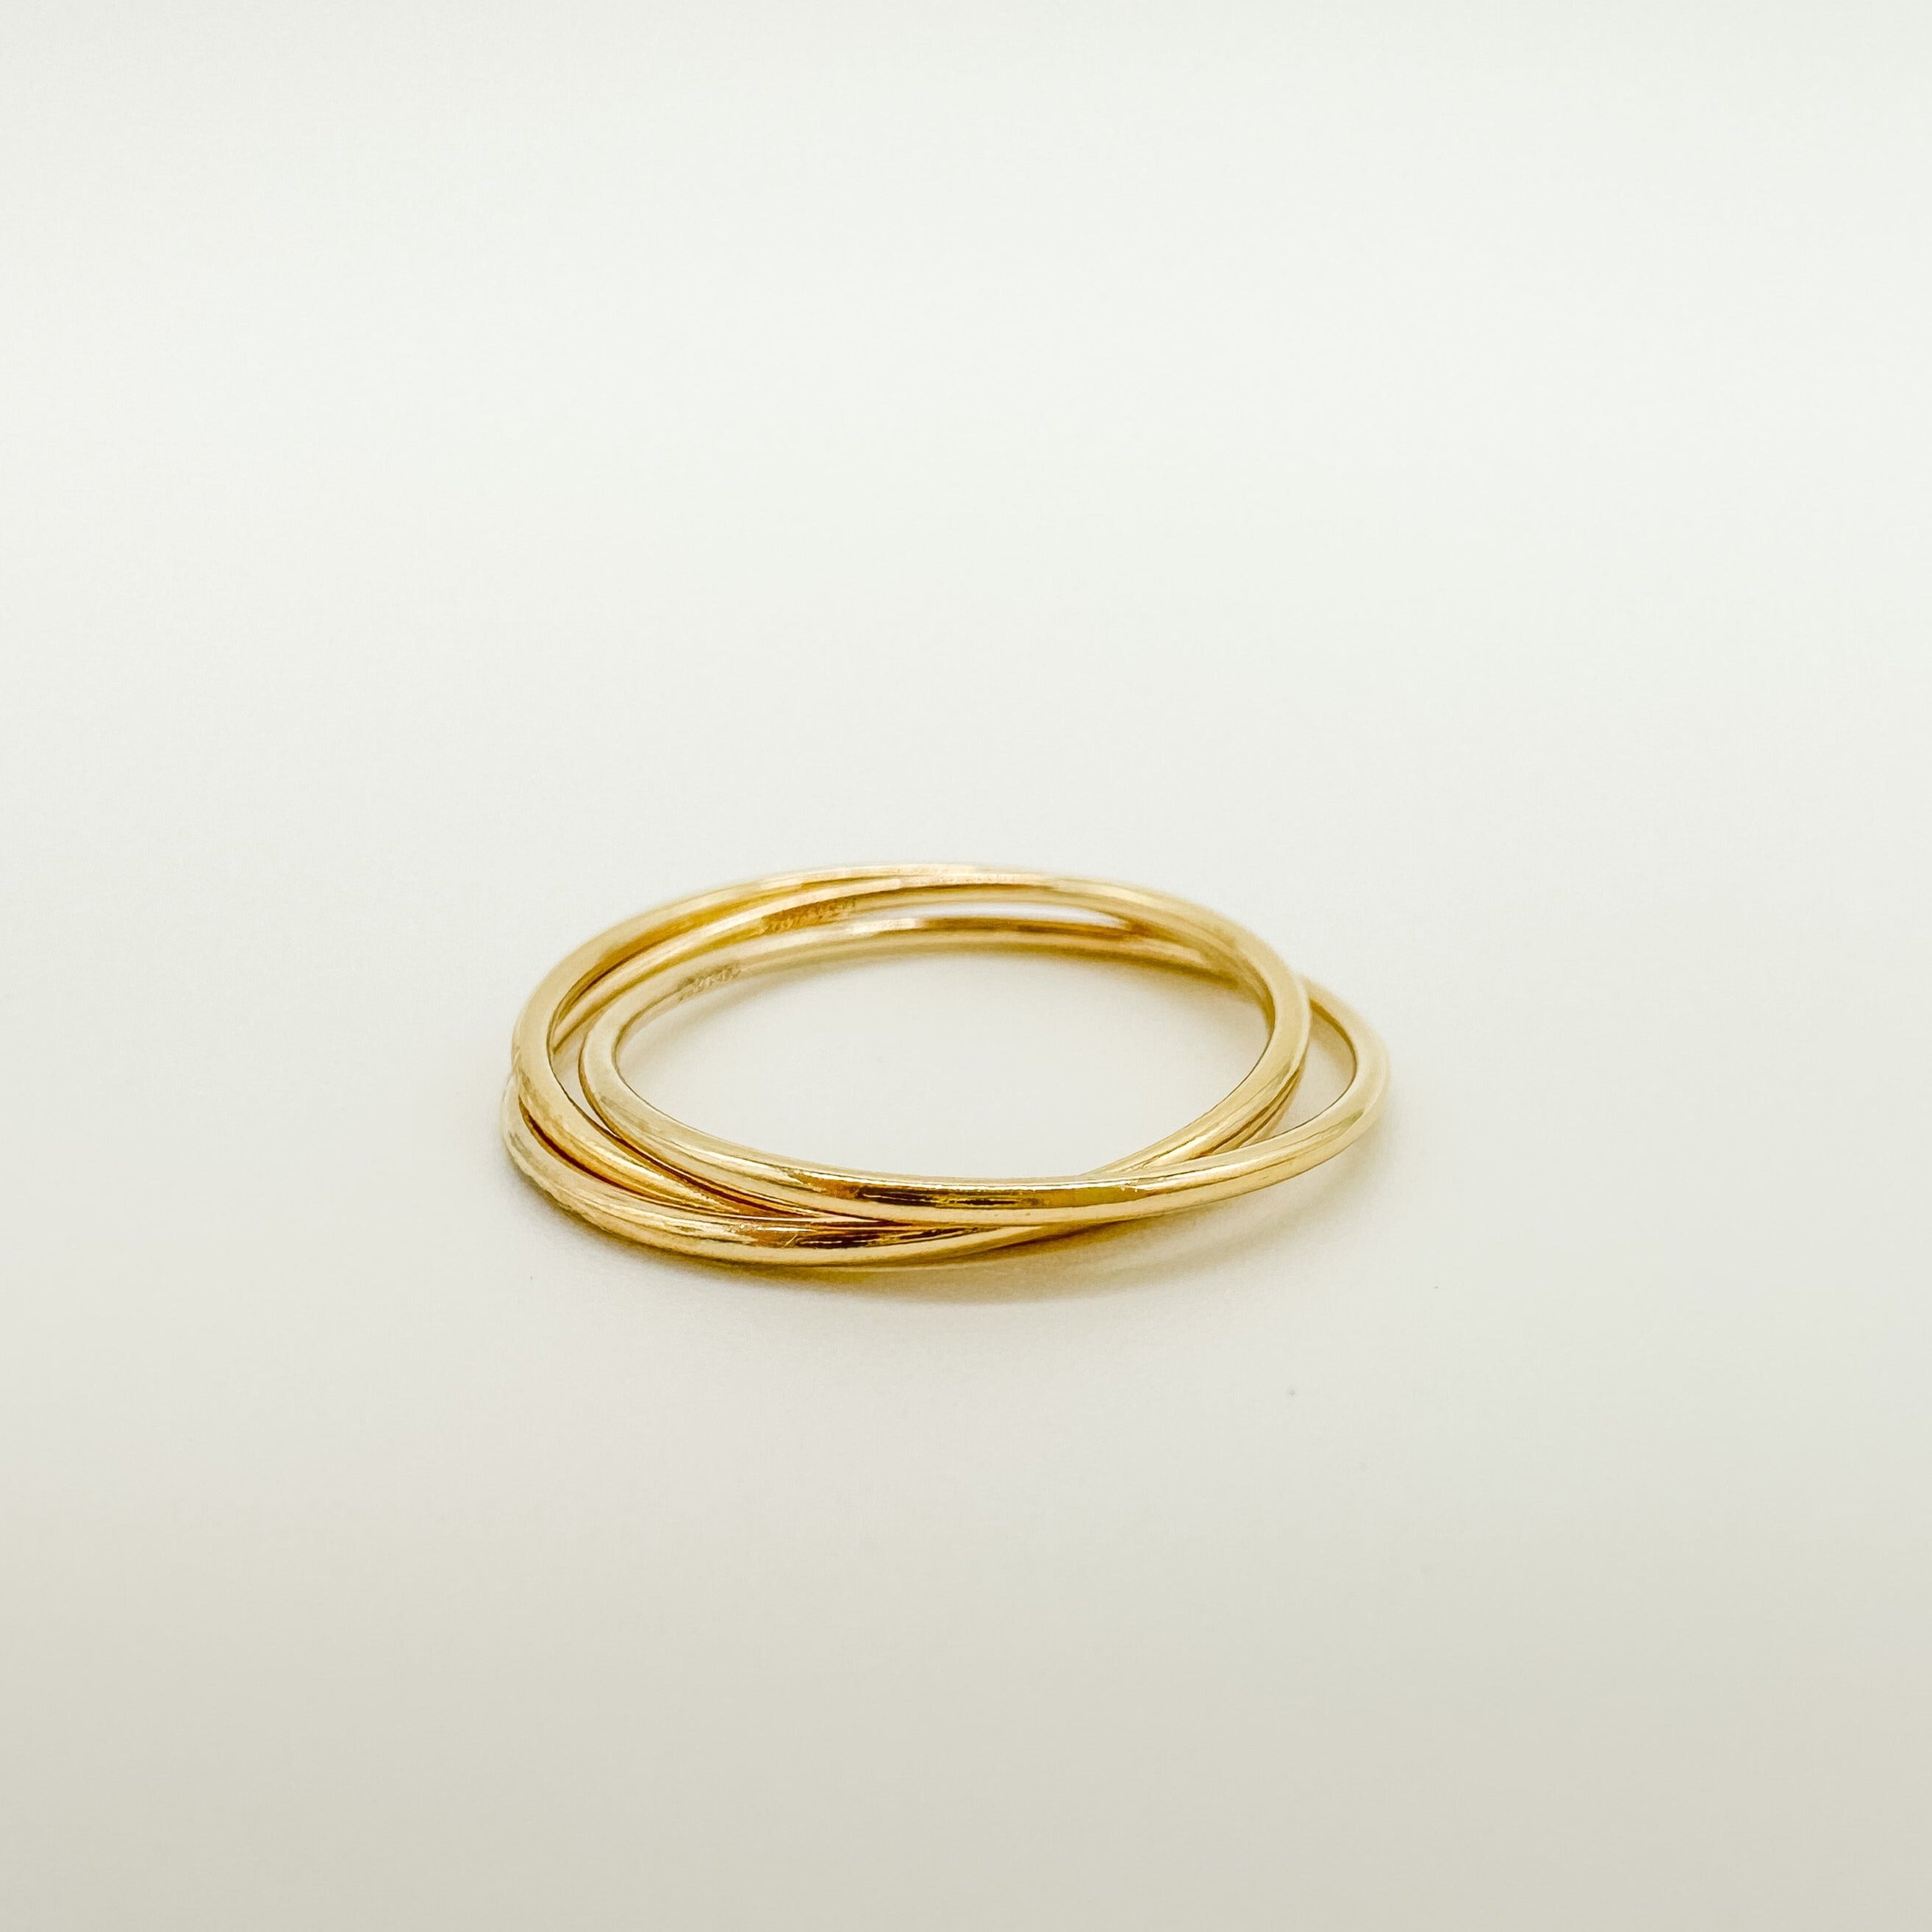 gold filled stacking ring/ fidget ring / rolling ring / gold filled ring